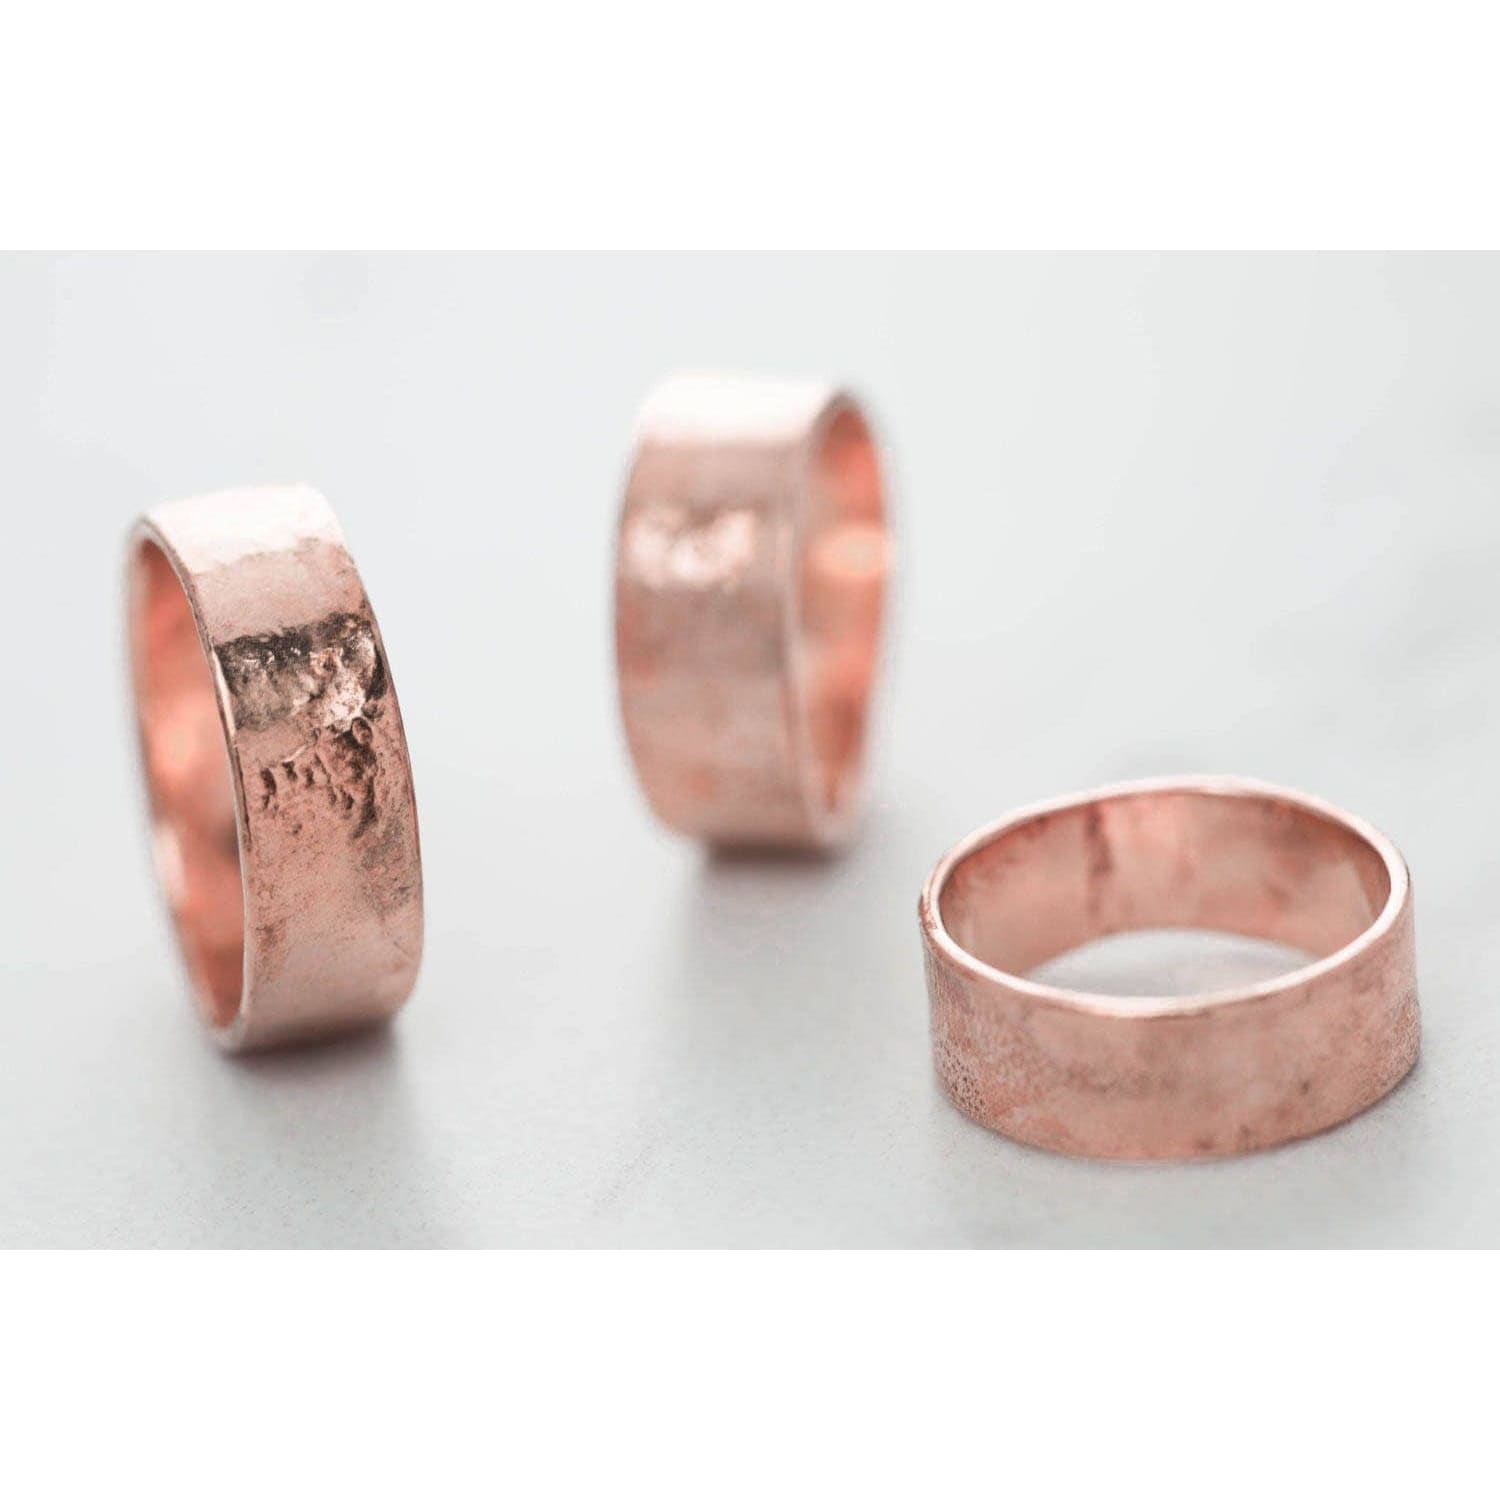 Textured Cigar Band 7mm in Rose Gold Raw Gemstone Jewelry